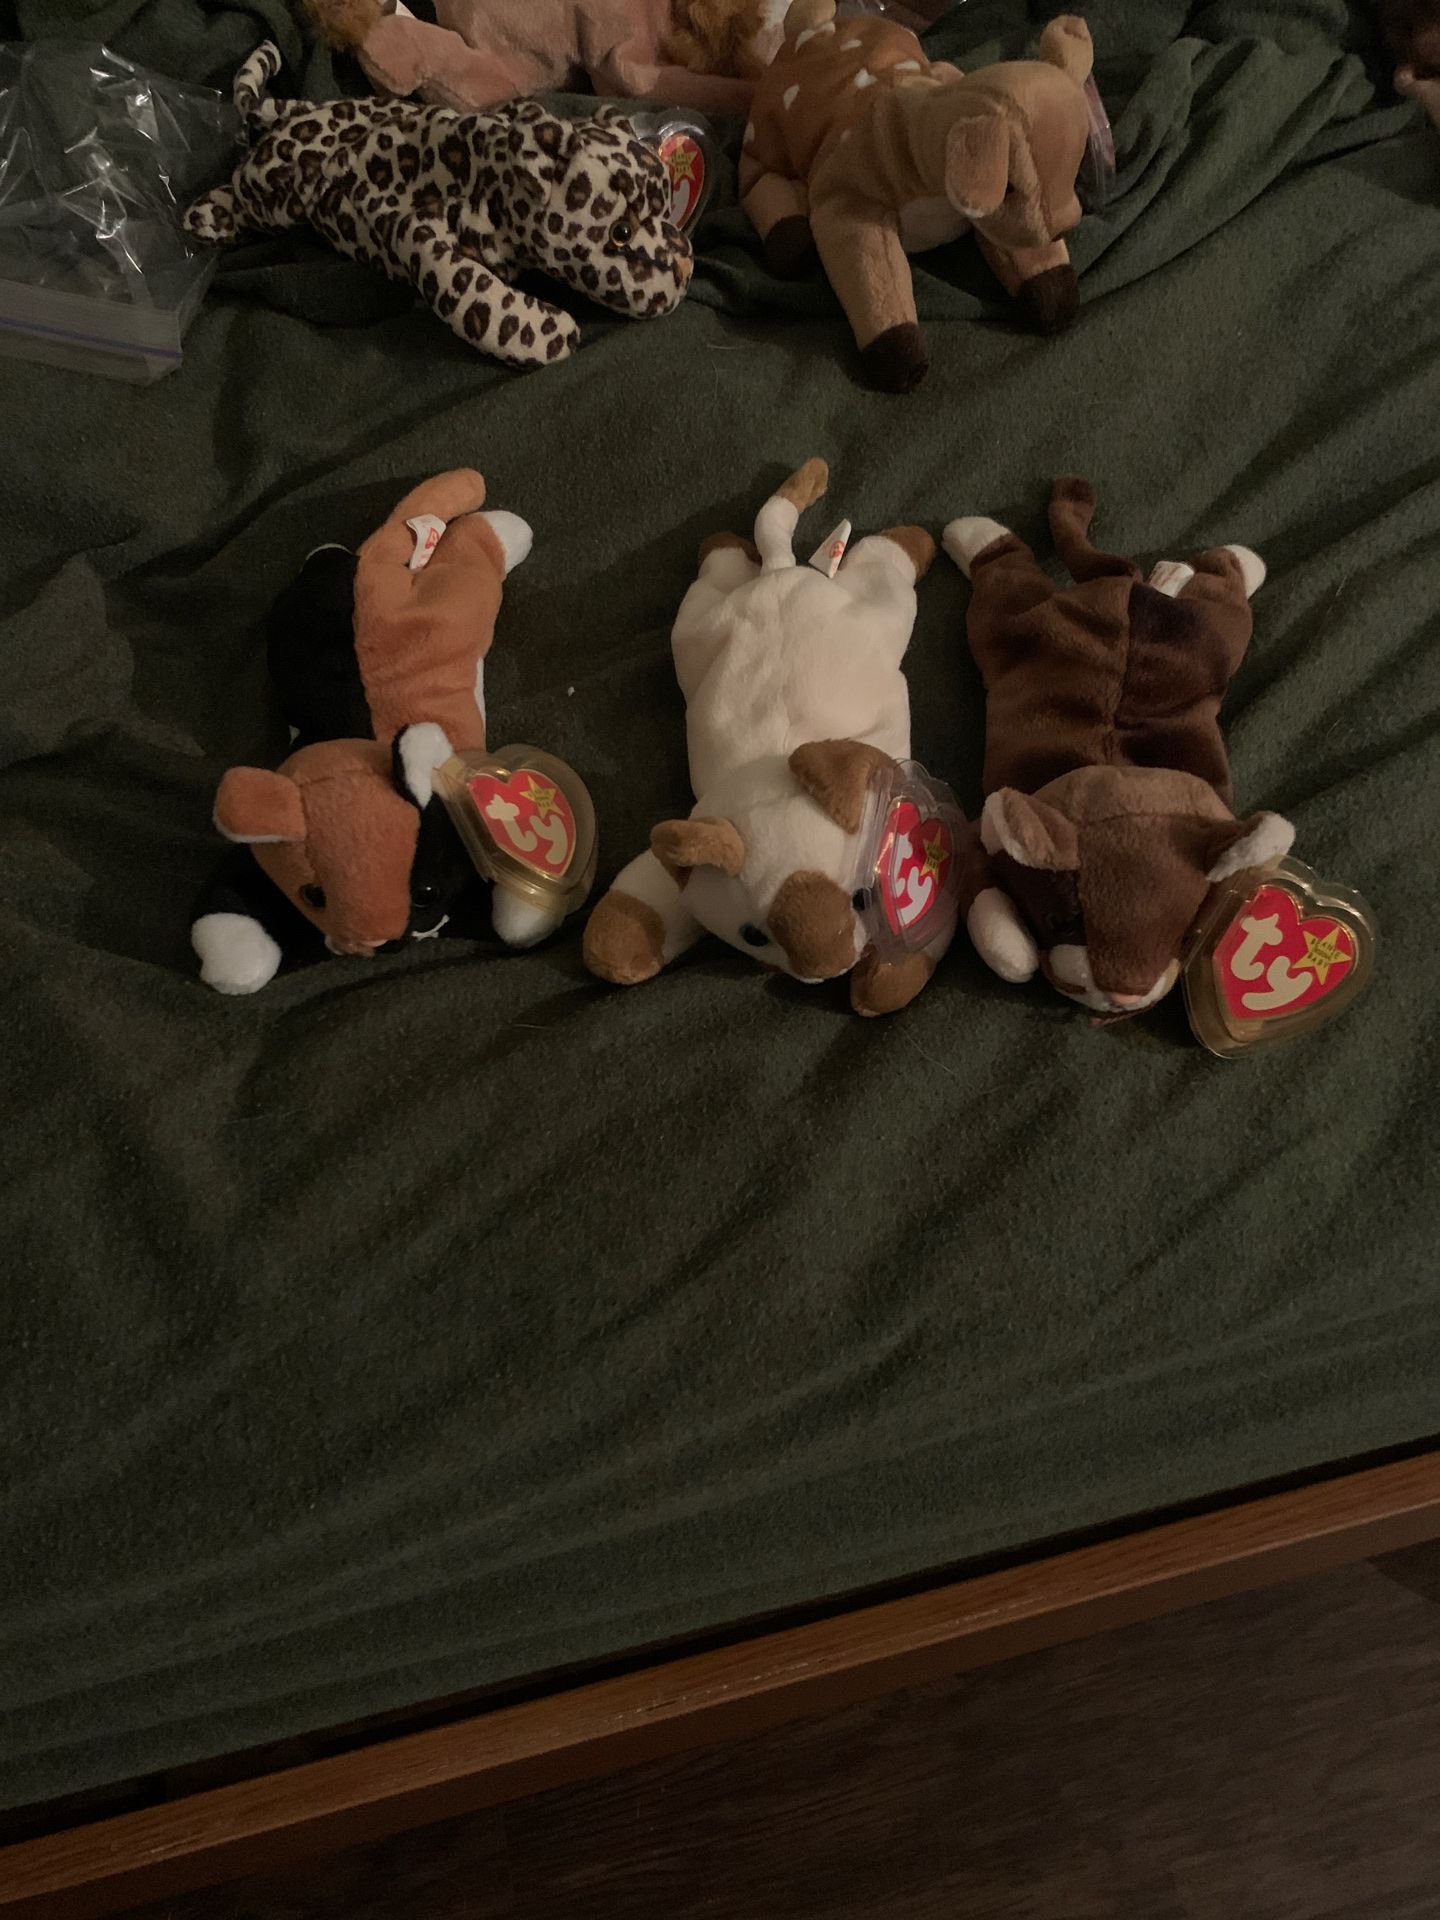 Original beanie babies pounce, snip and chip